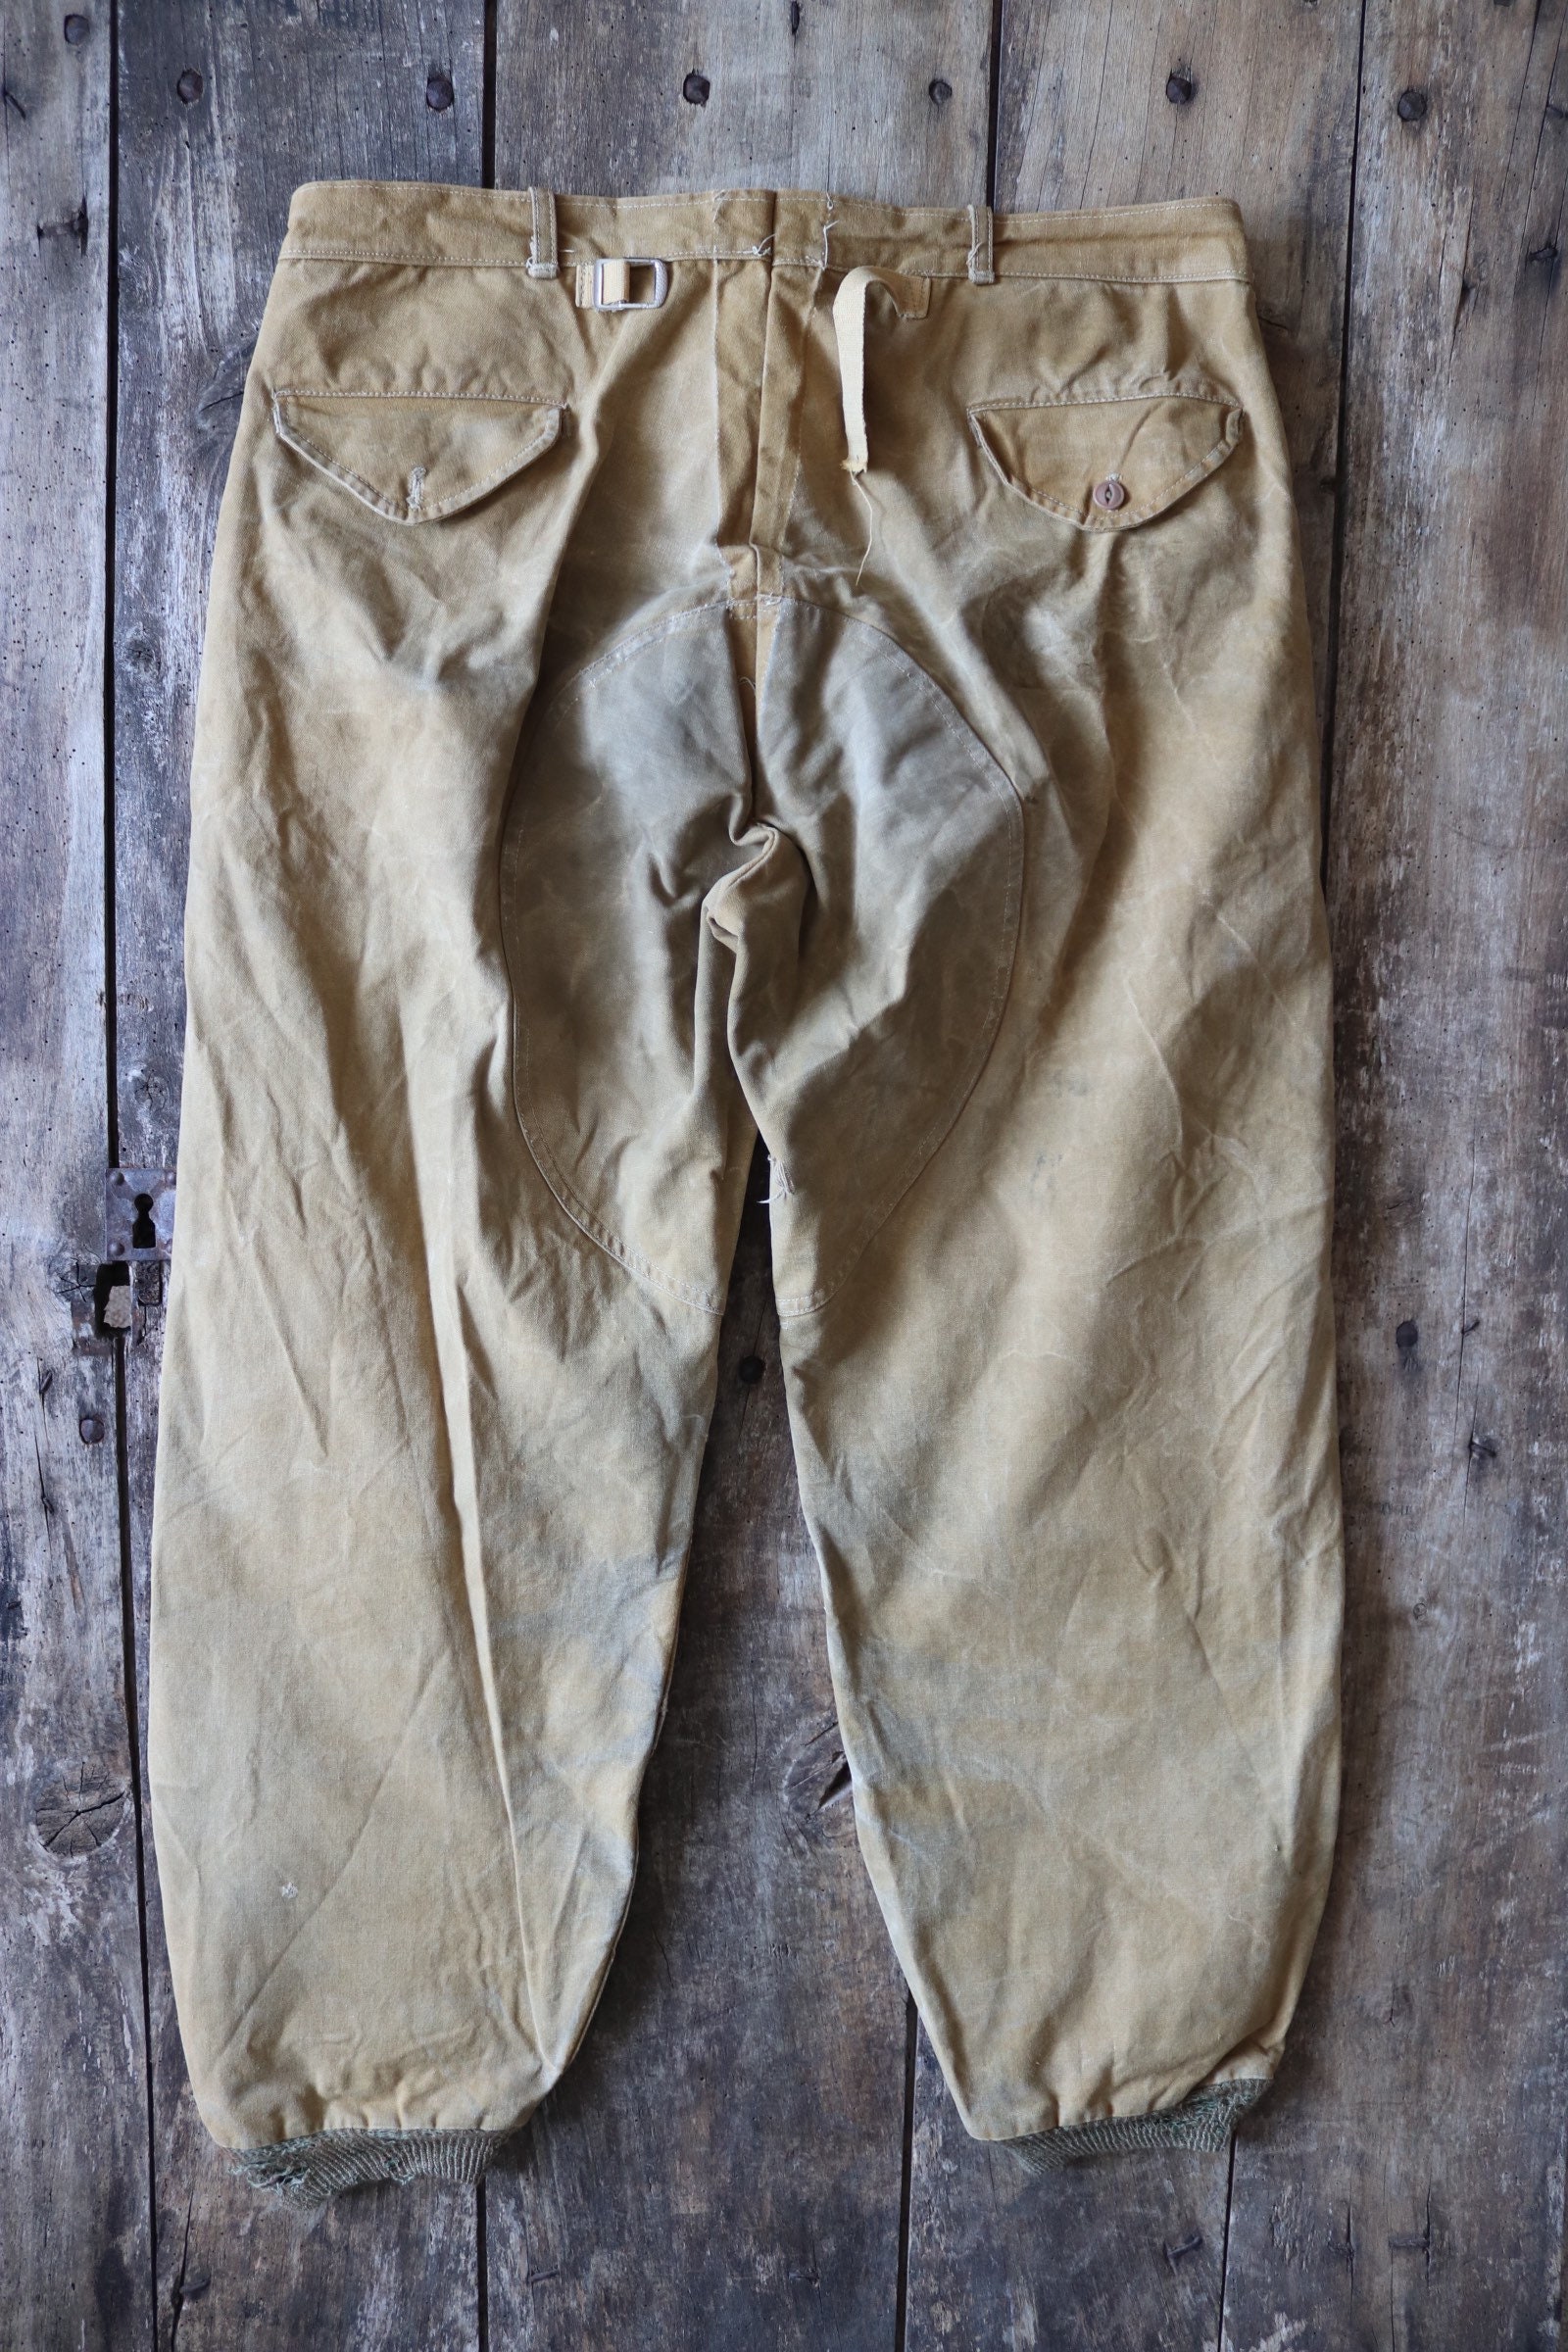 Vintage 1950s 50s 1960s 60s Hinson Bodyguard hunting trousers pants ...